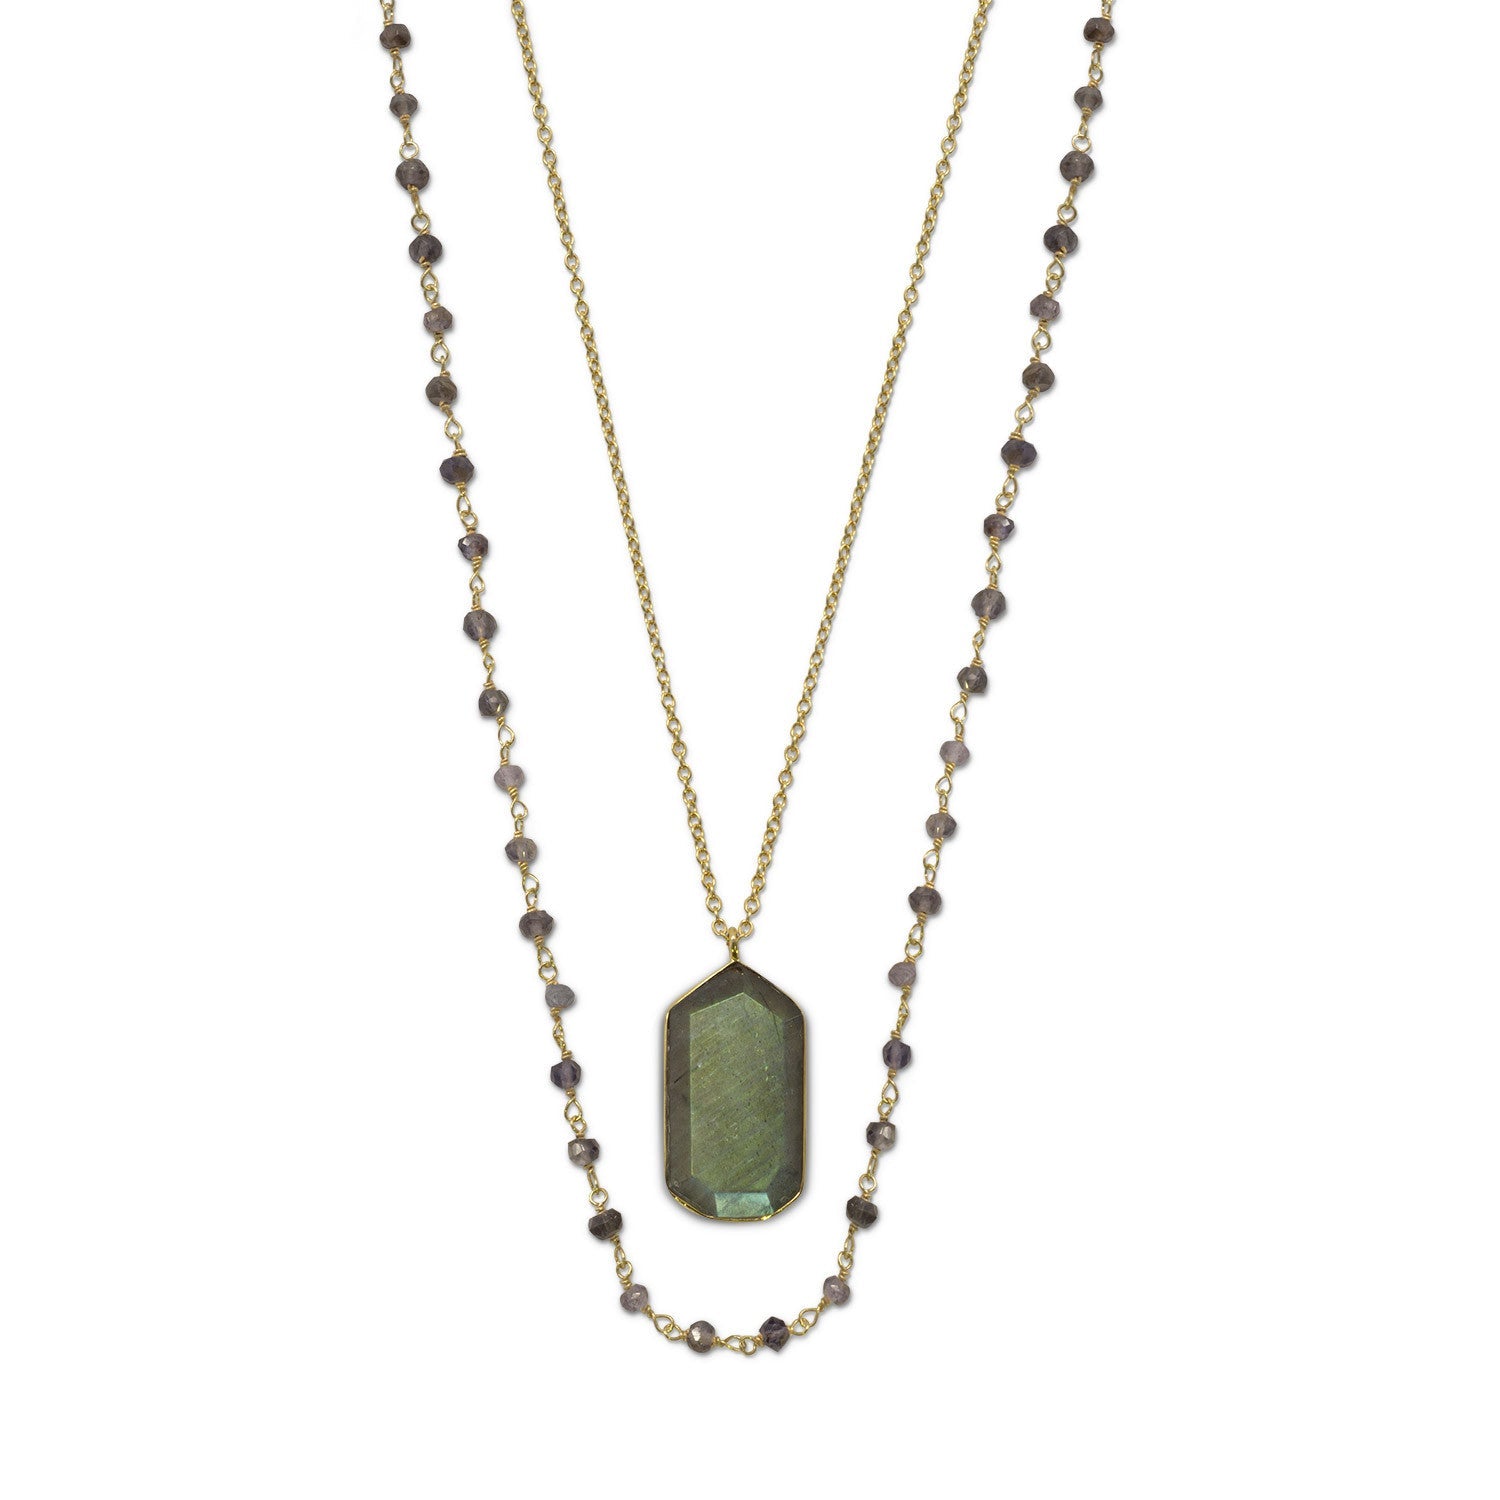 14 Karat Gold Plated Double Strand Iolite and Labradorite Necklace